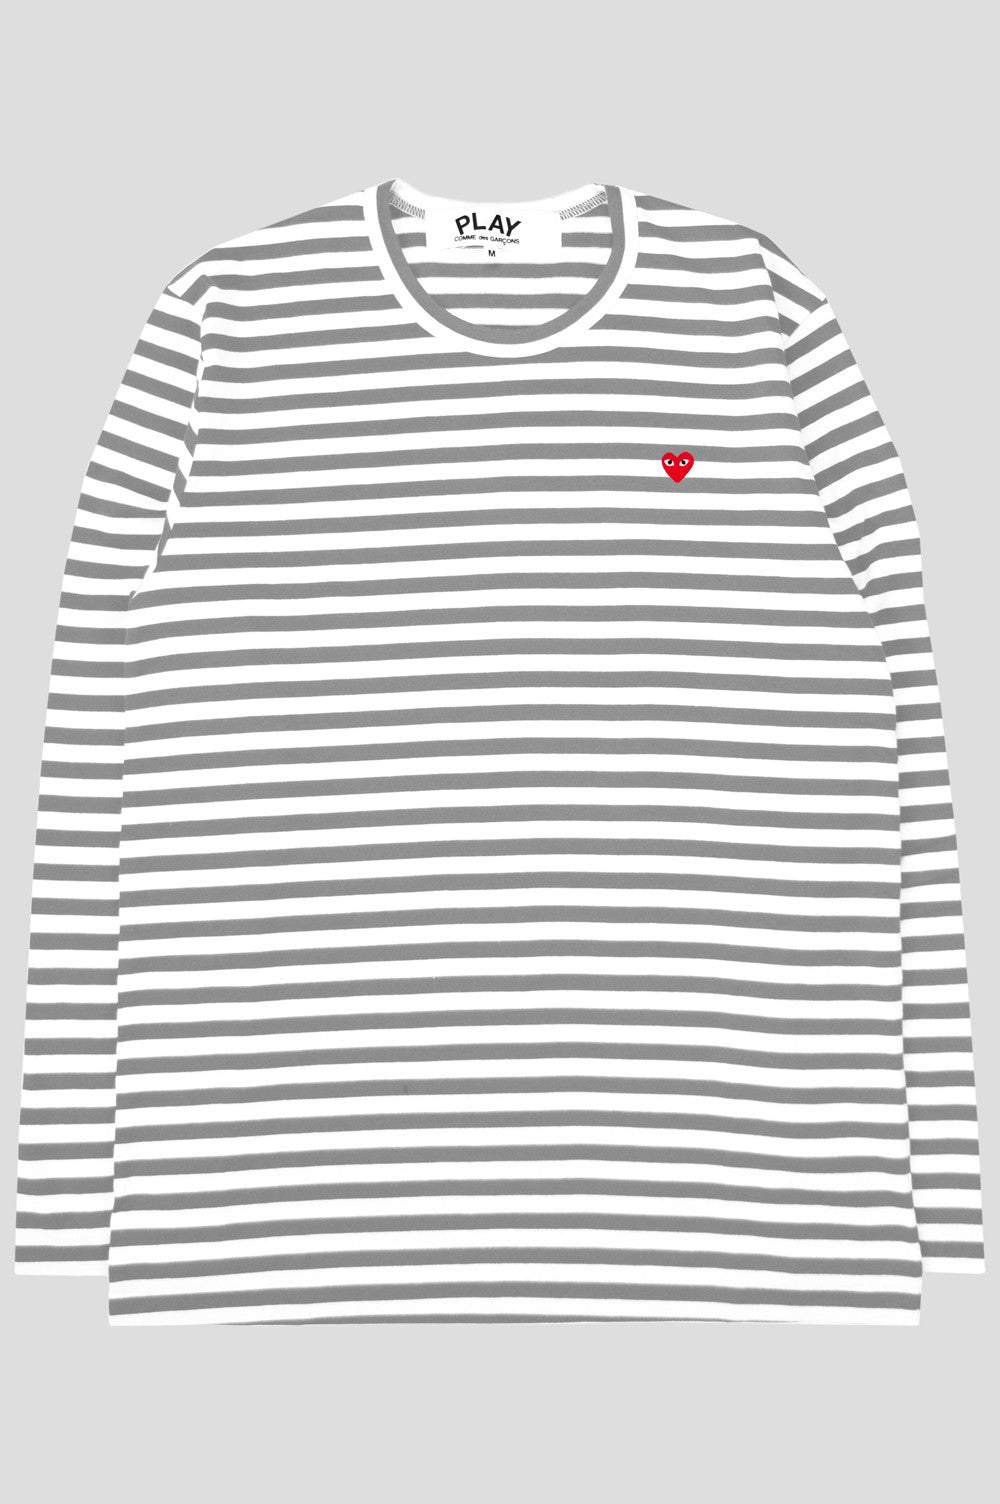 COMME DES GARCONS PLAY LS STRIPED TSHIRT GREY WHITE - BLENDS